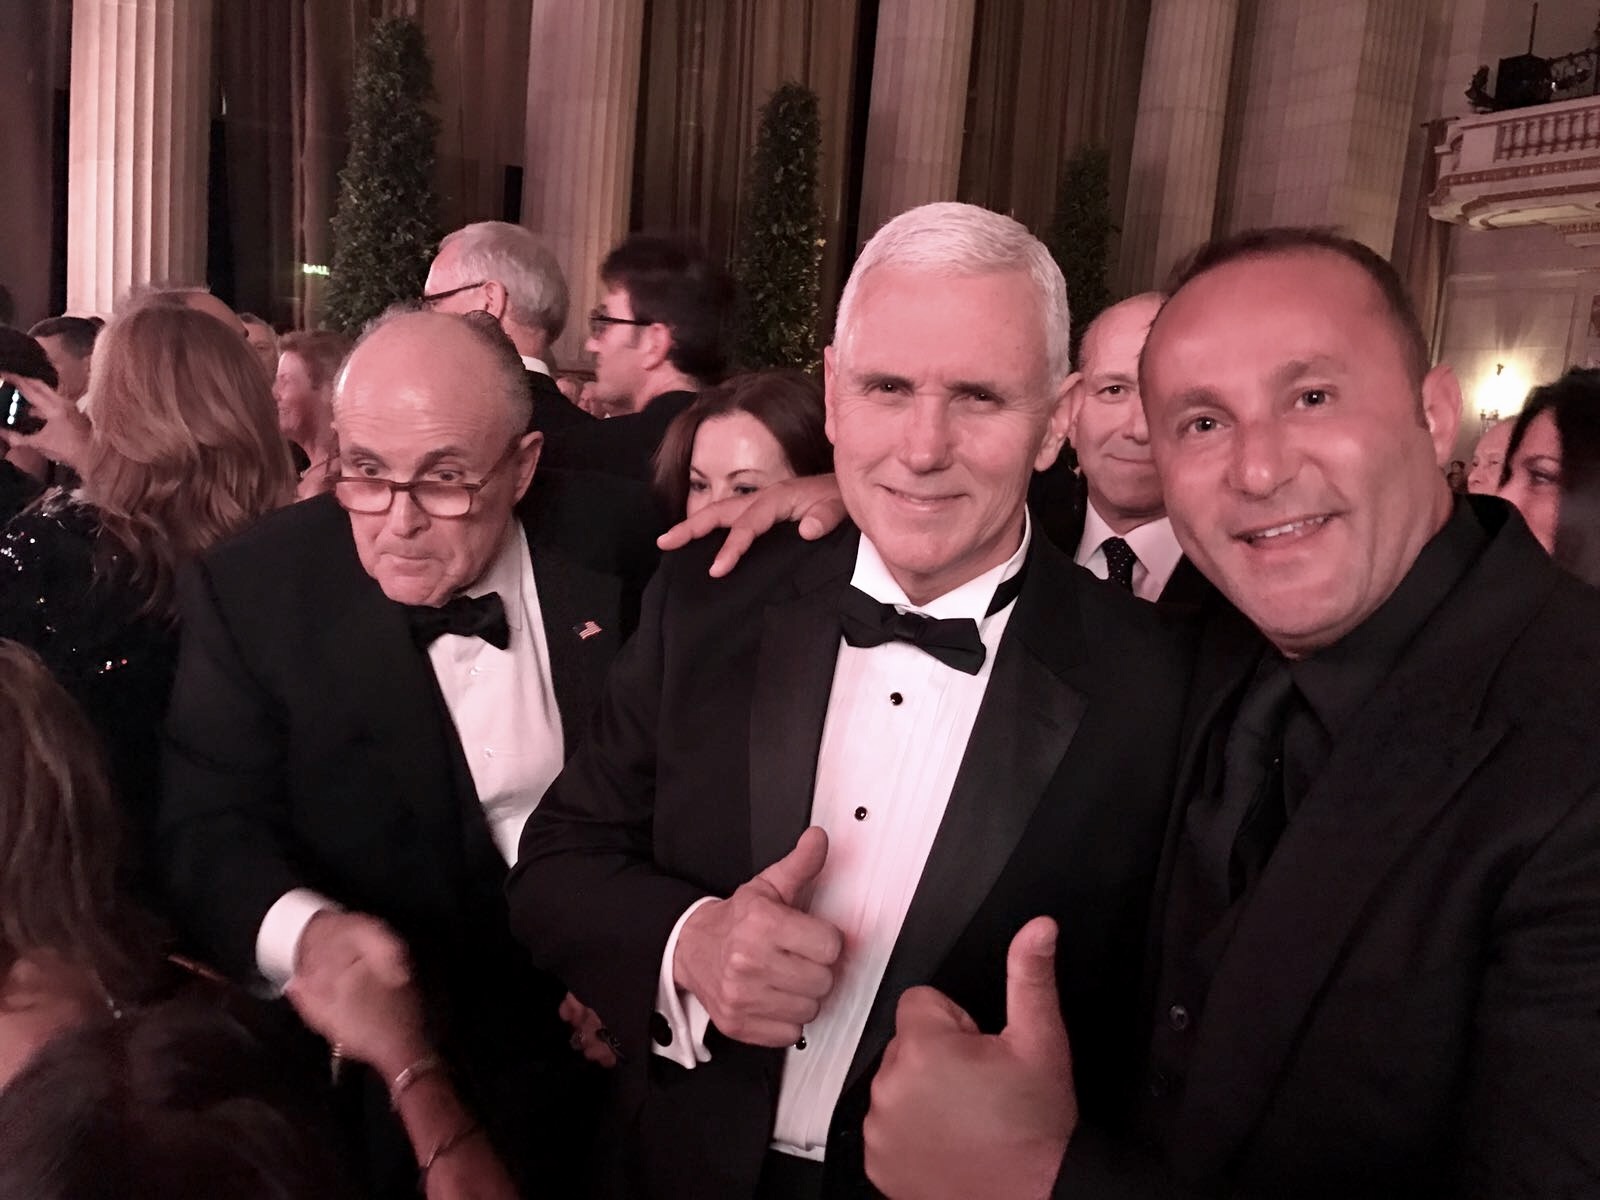 Dr. Andy Khawaja with Mike Pence